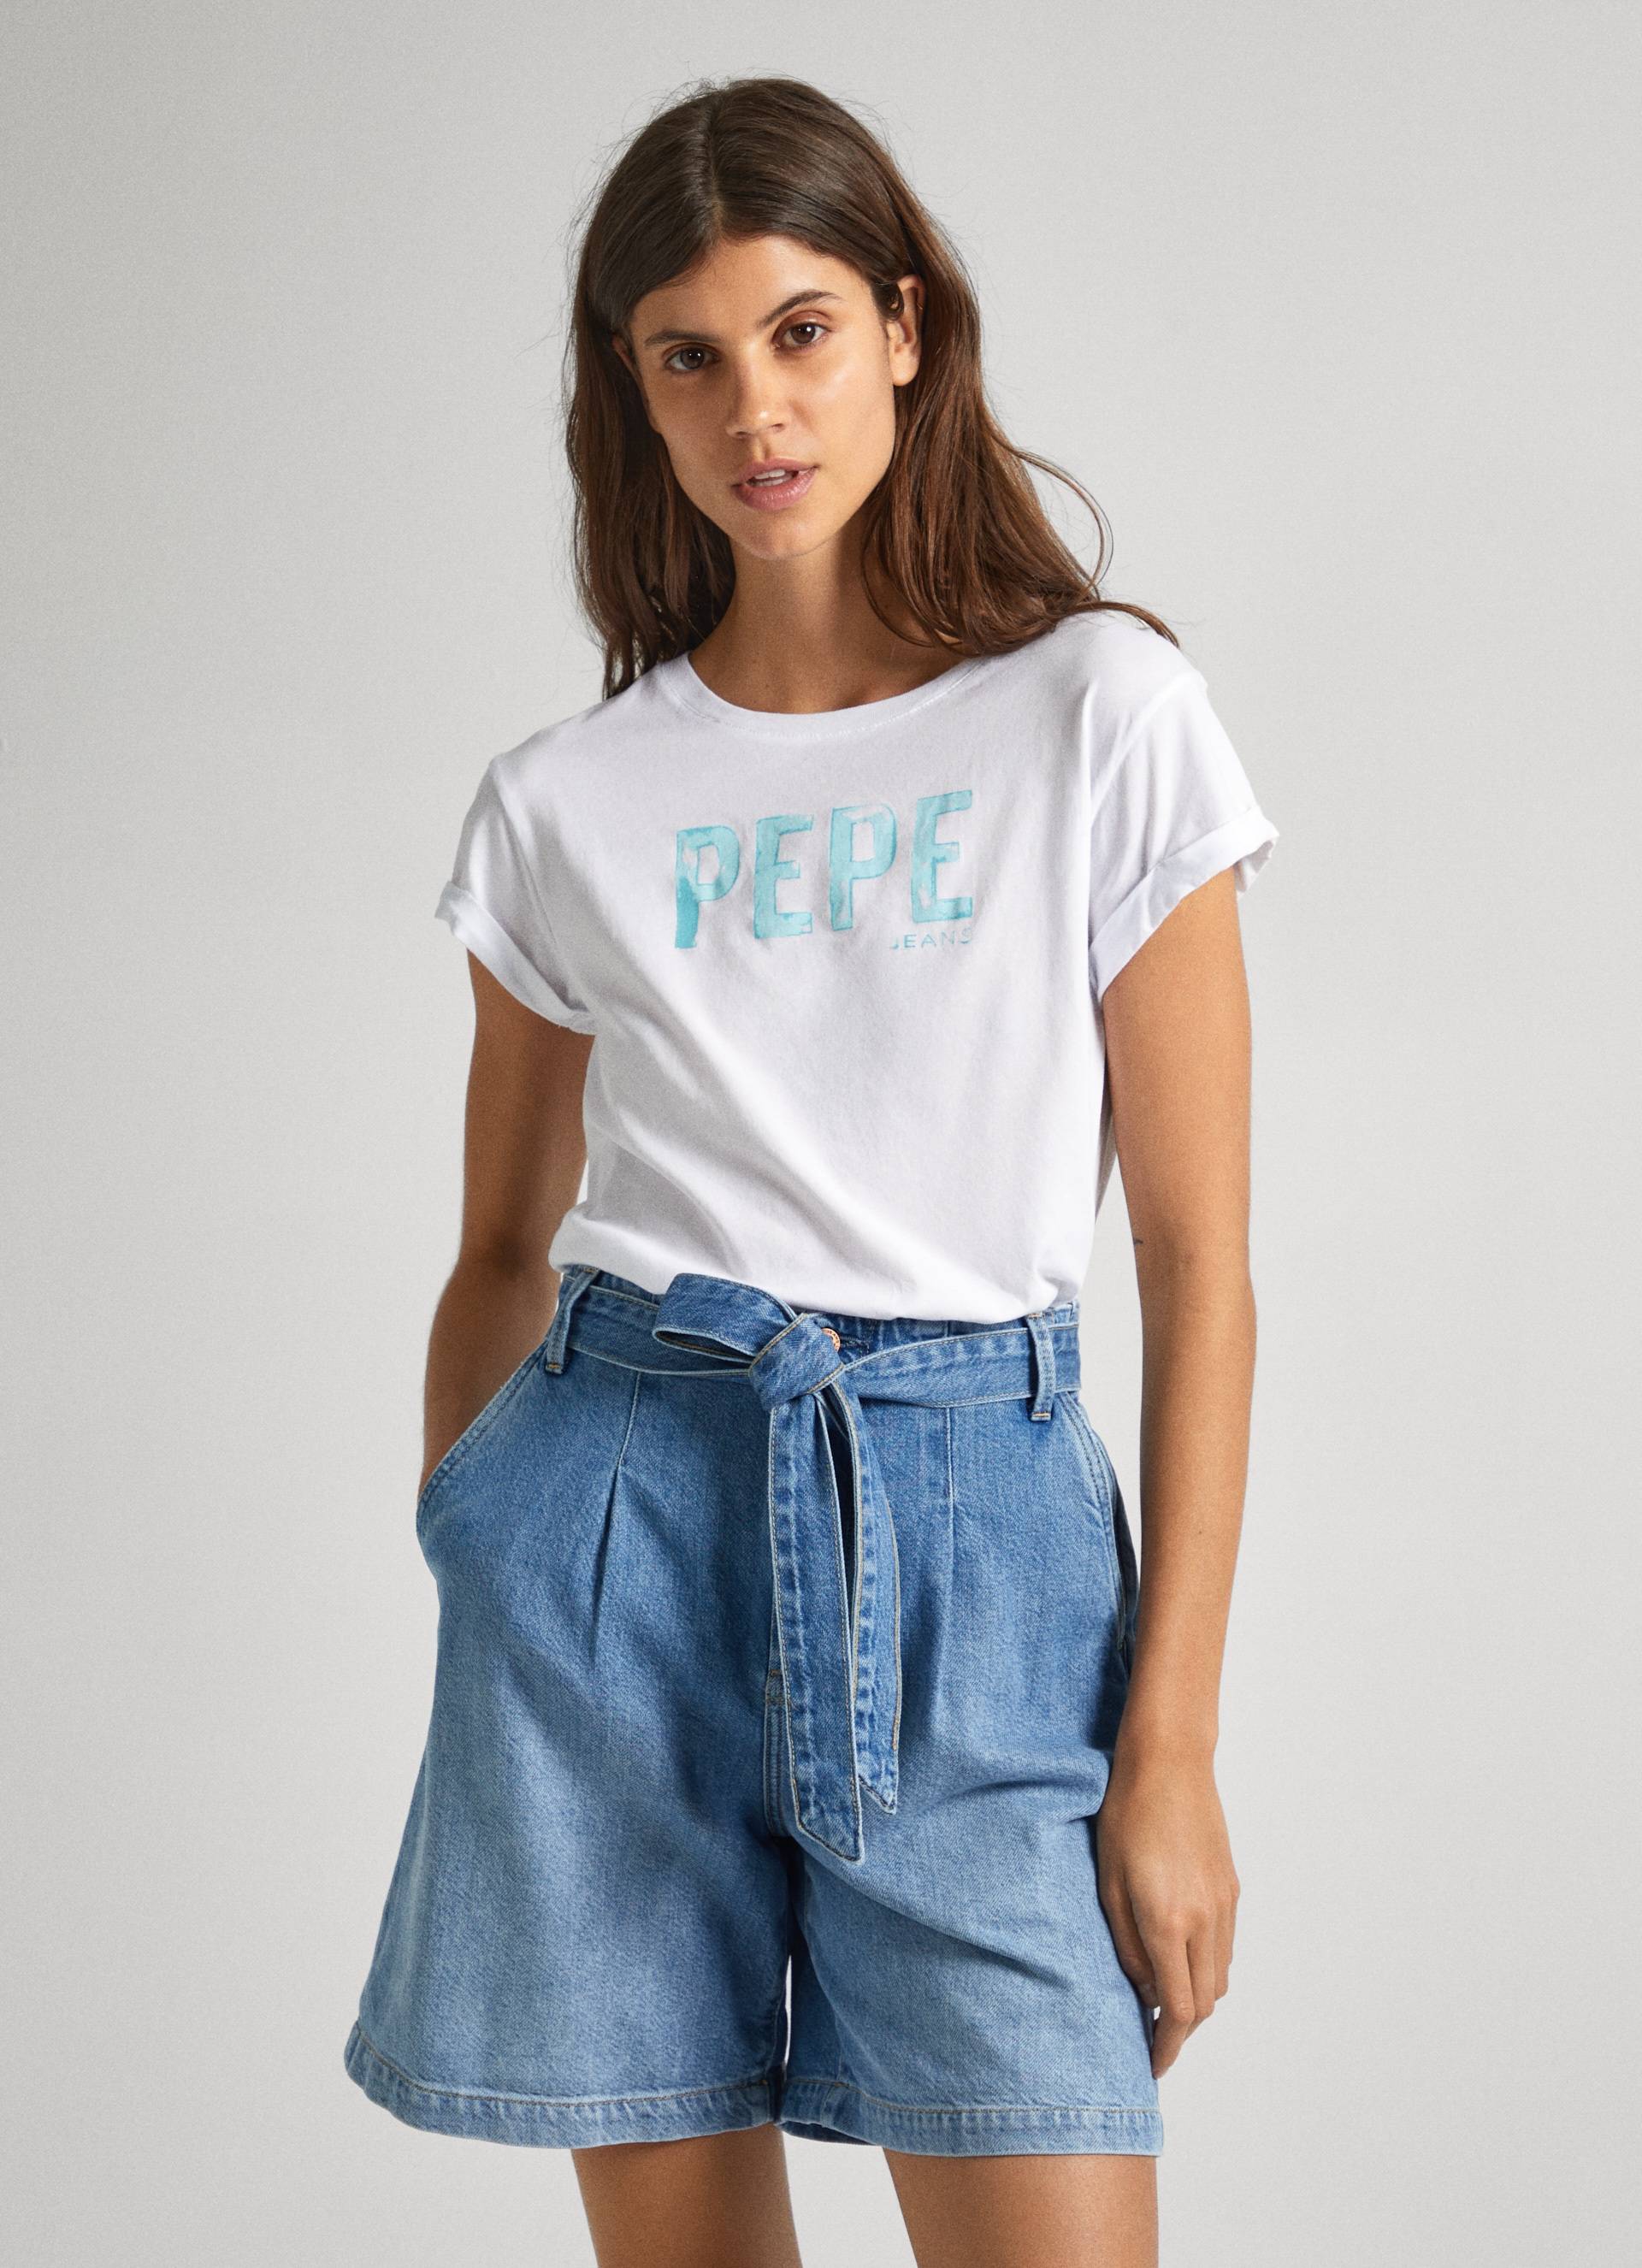 Pepe Jeans T-Shirt »Janet« von Pepe Jeans